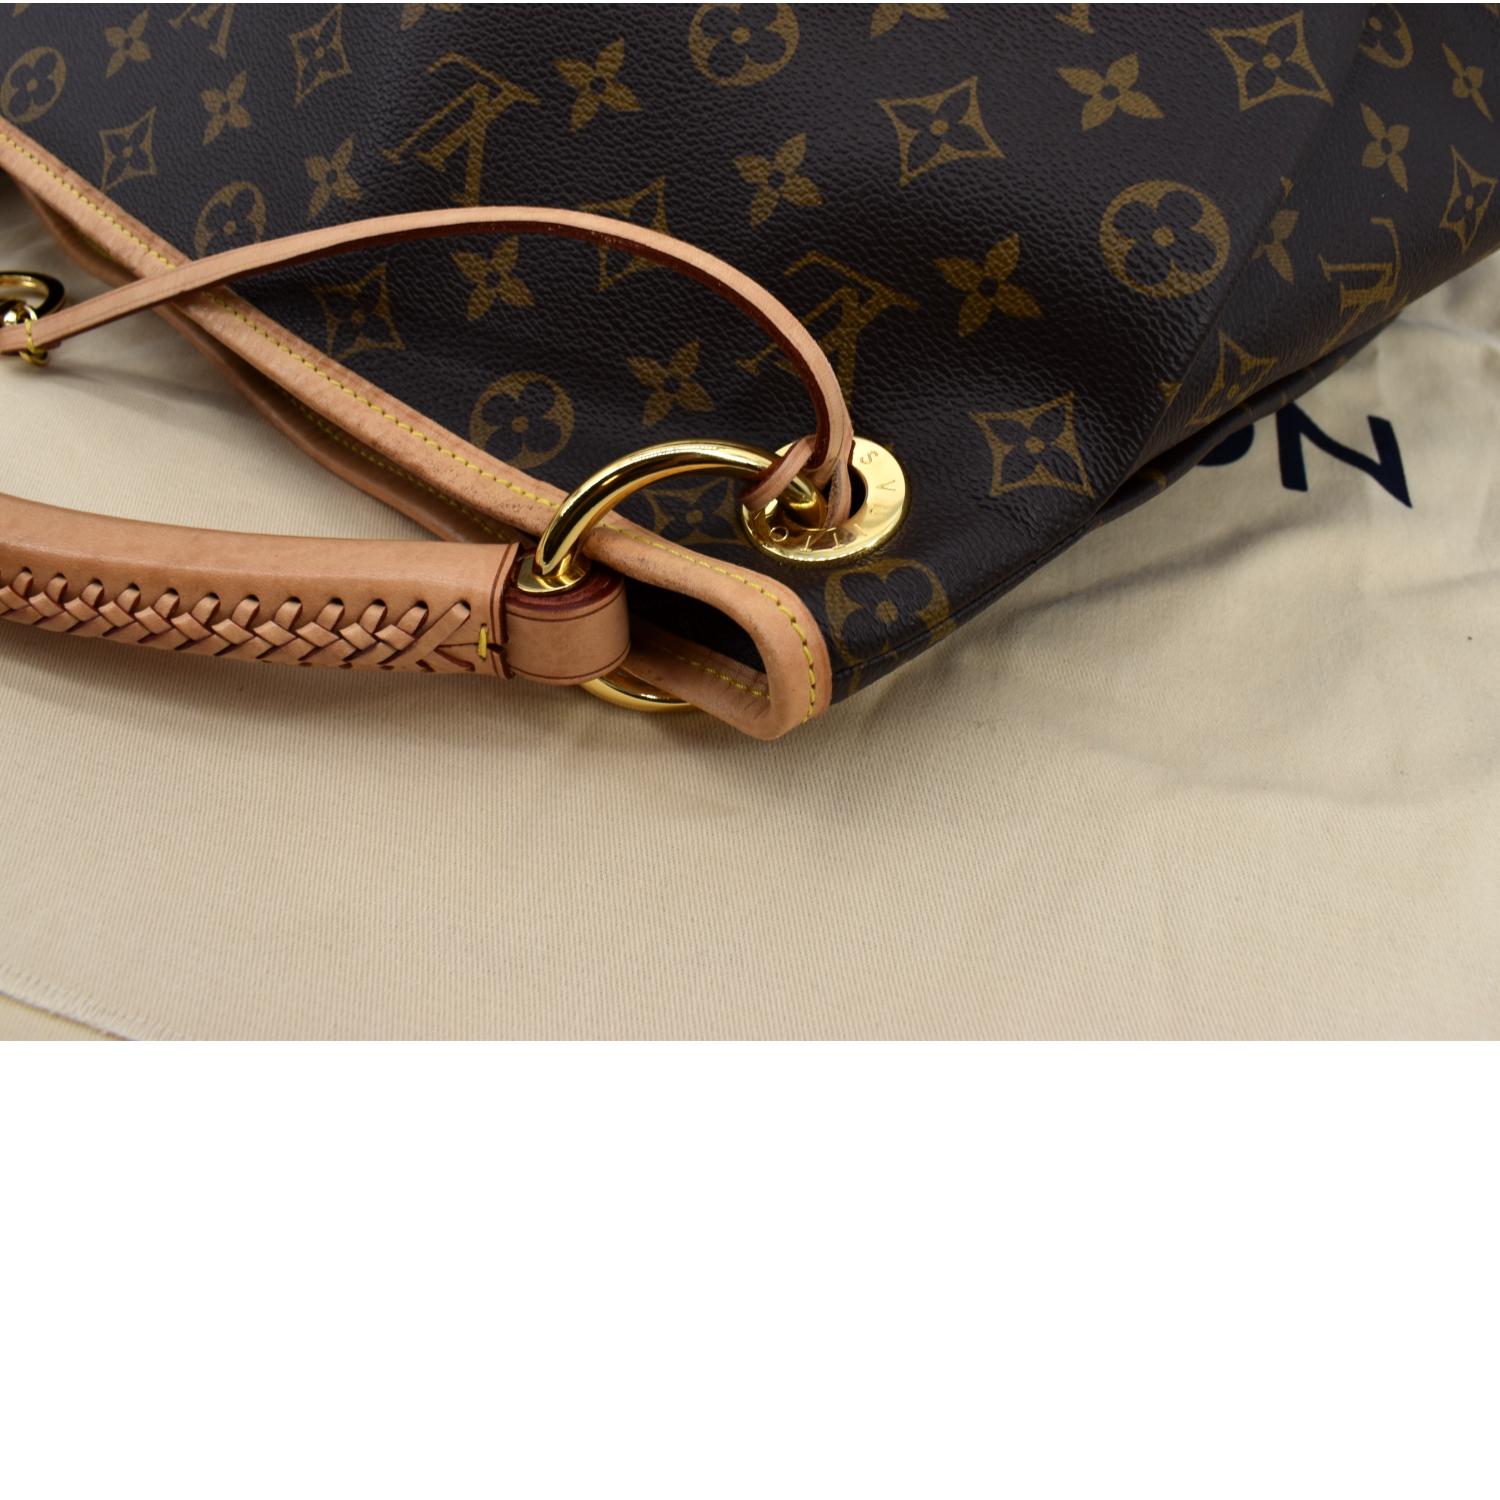 Louis Vuitton Front Pocket Hobo Bags for Women